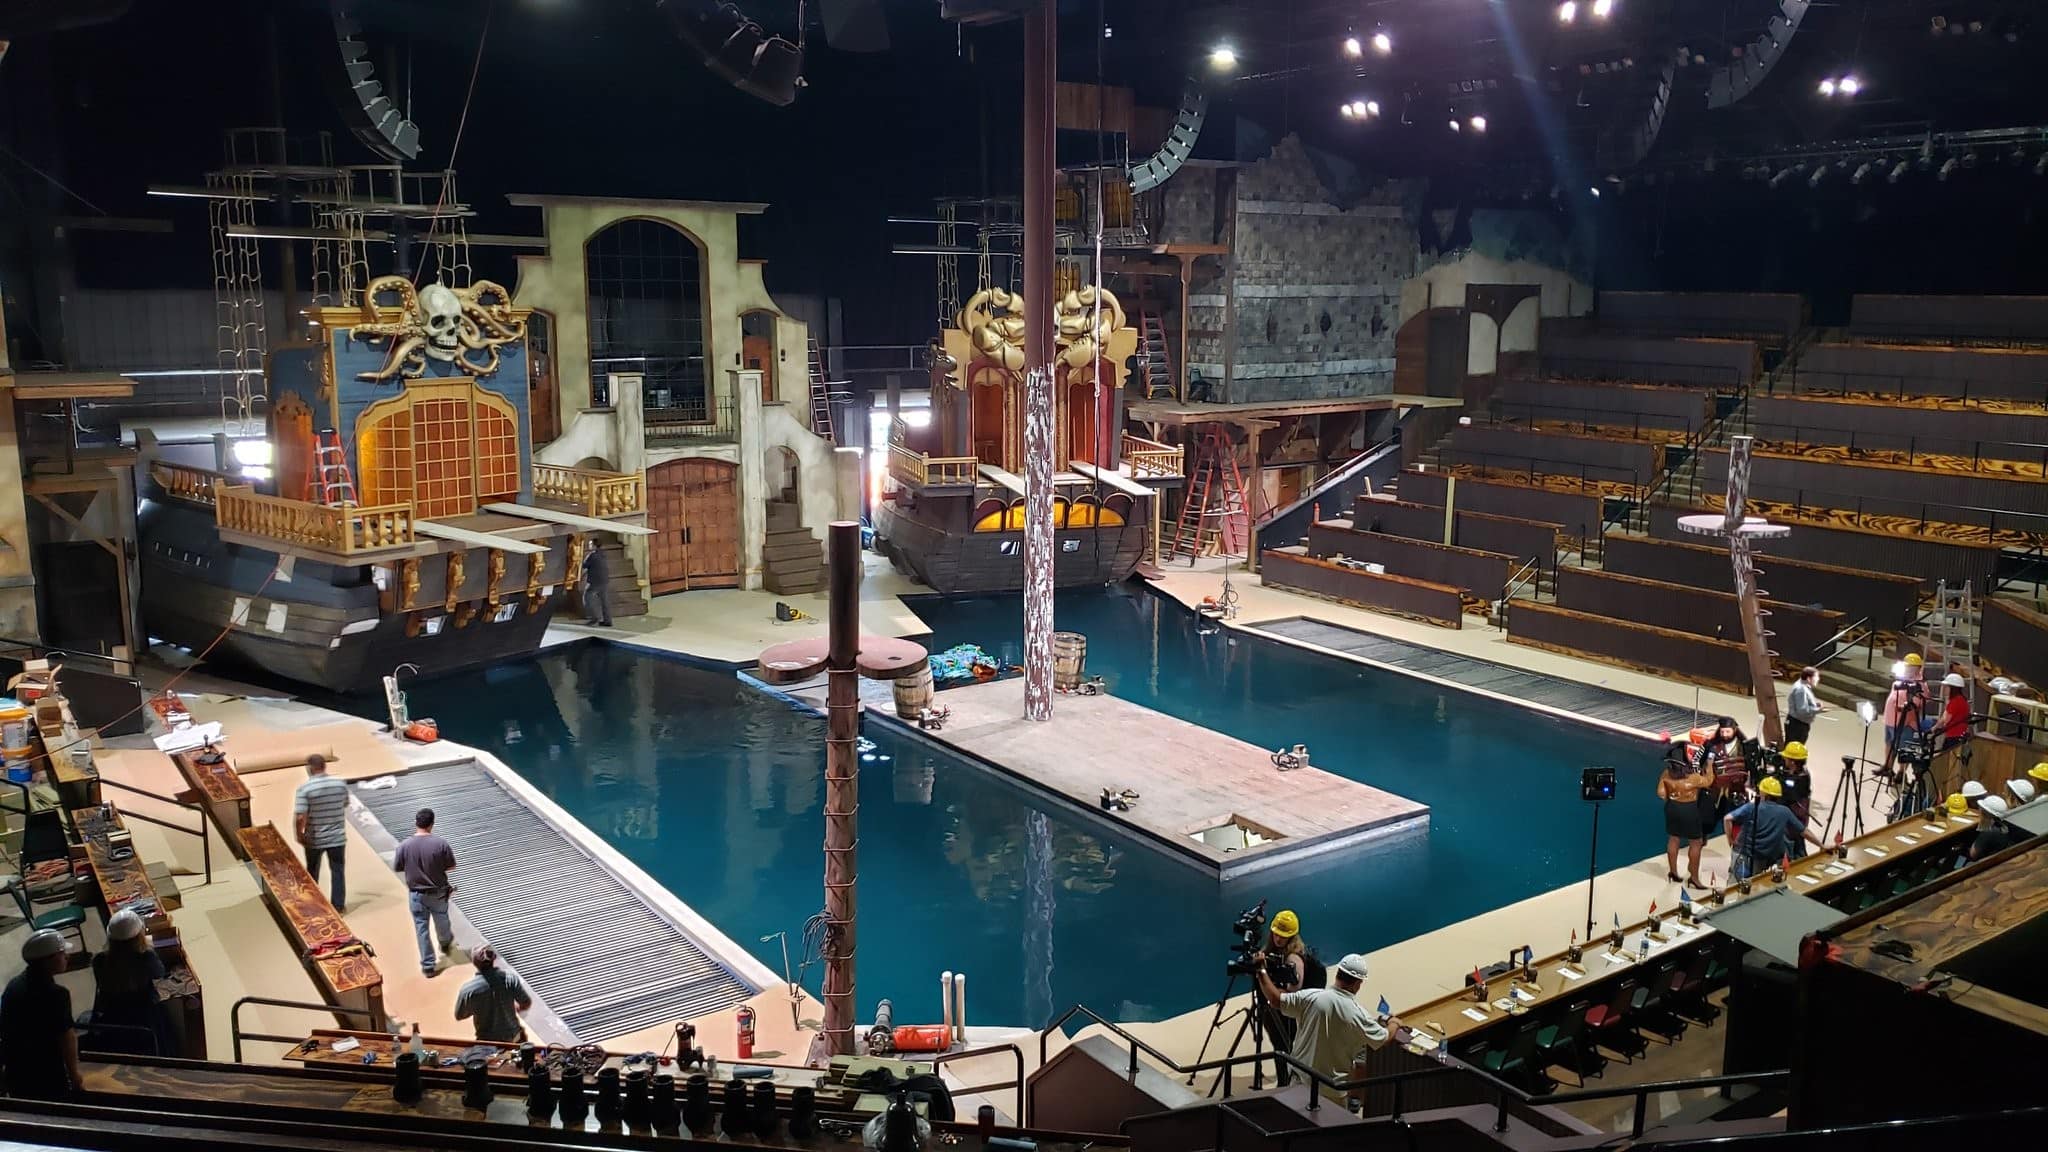 Dolly Parton's Pirates Voyage Dinner and Show restaurant (Credits: WCYB)